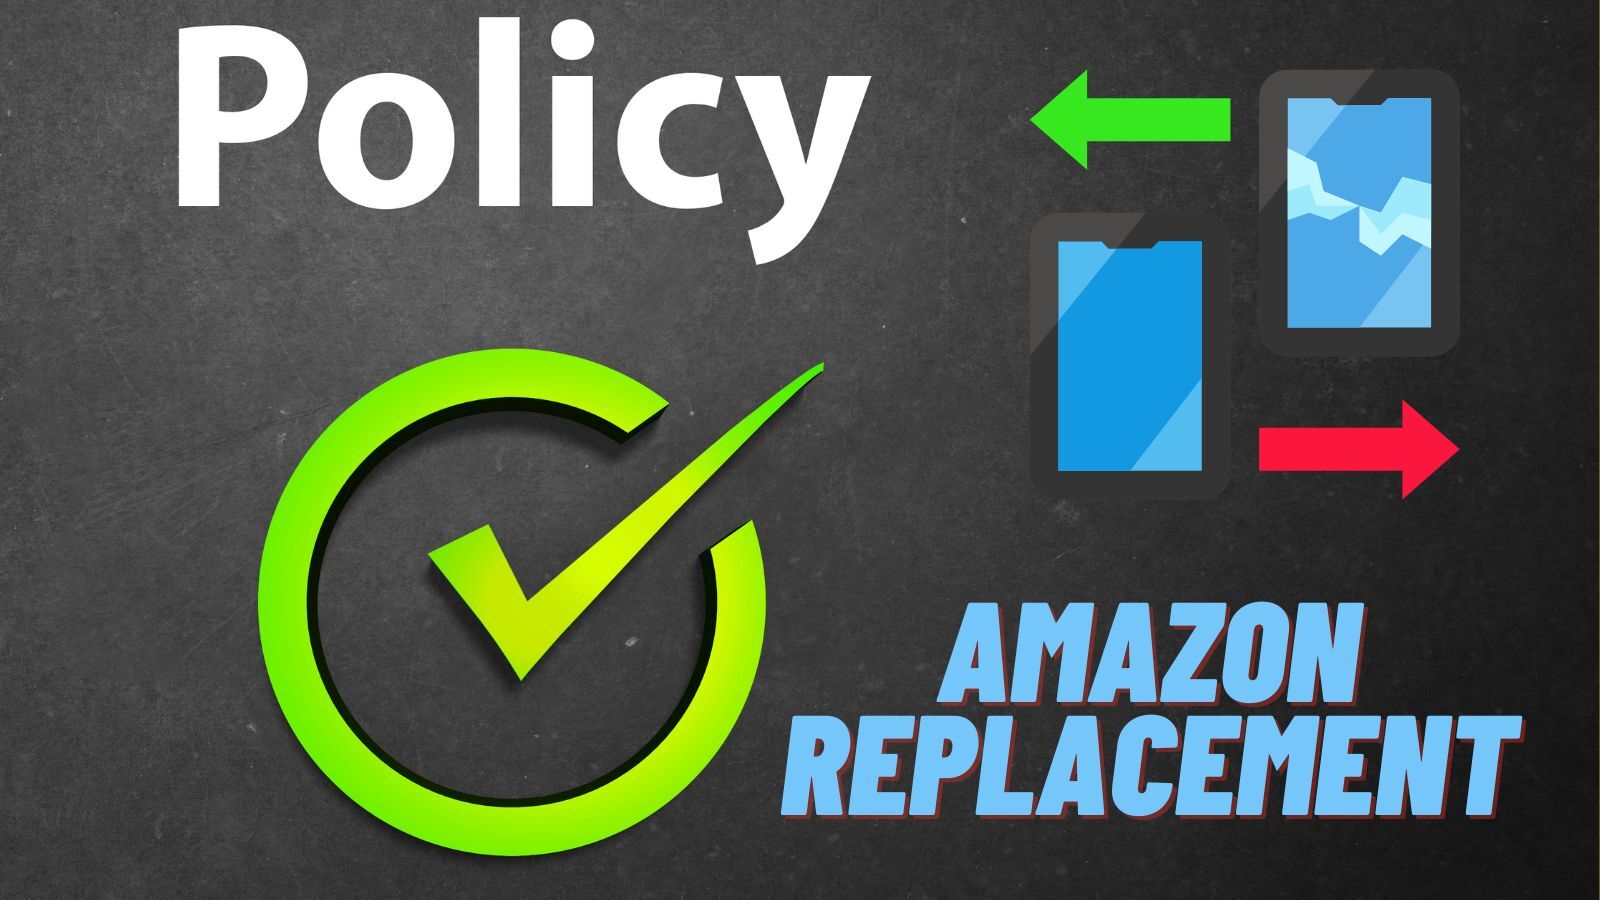 Amazon Replacement Policy: What to Watch Out For?